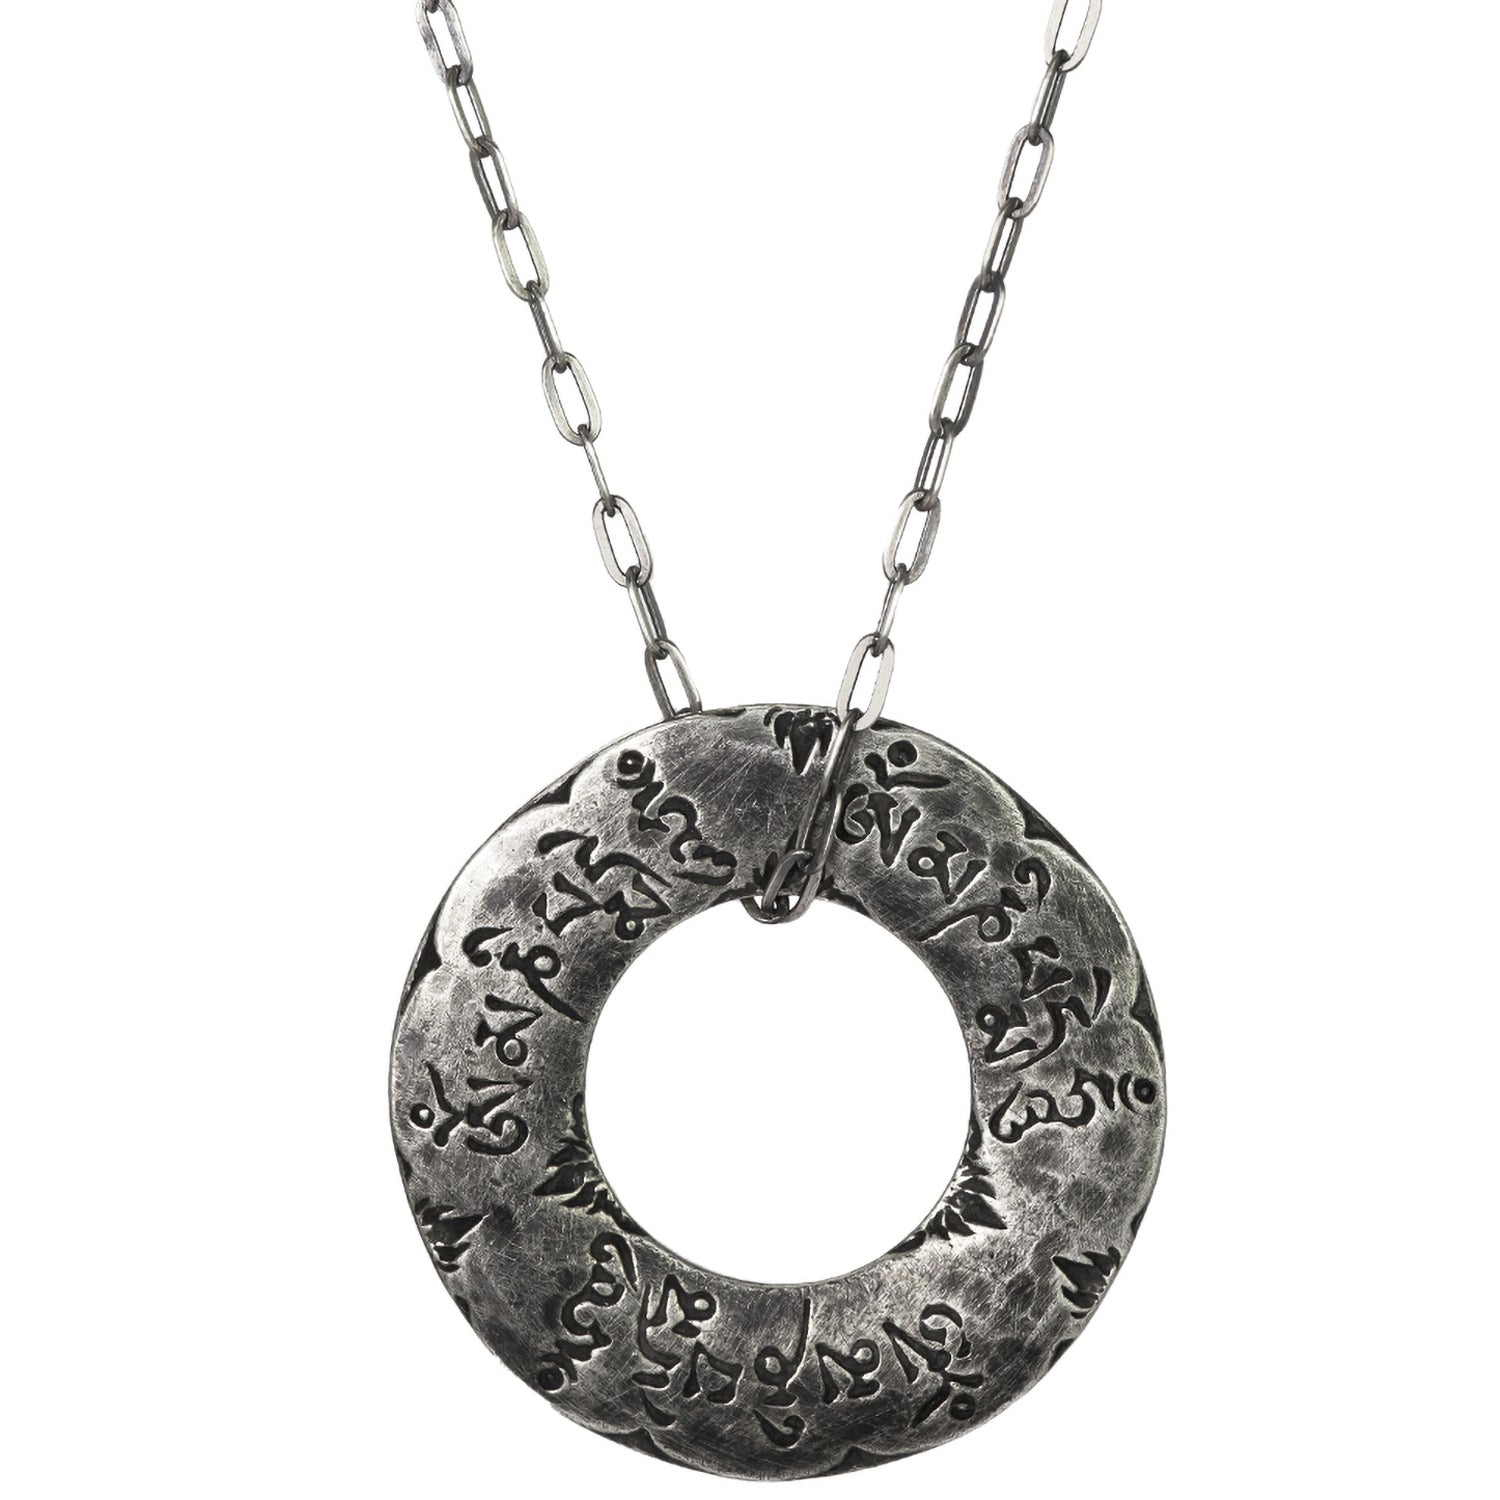 Om Mani Padme Hum Mantra necklace made from oxidized Sterling silver by ETERNAL BLISS - Spiritual Jewellery